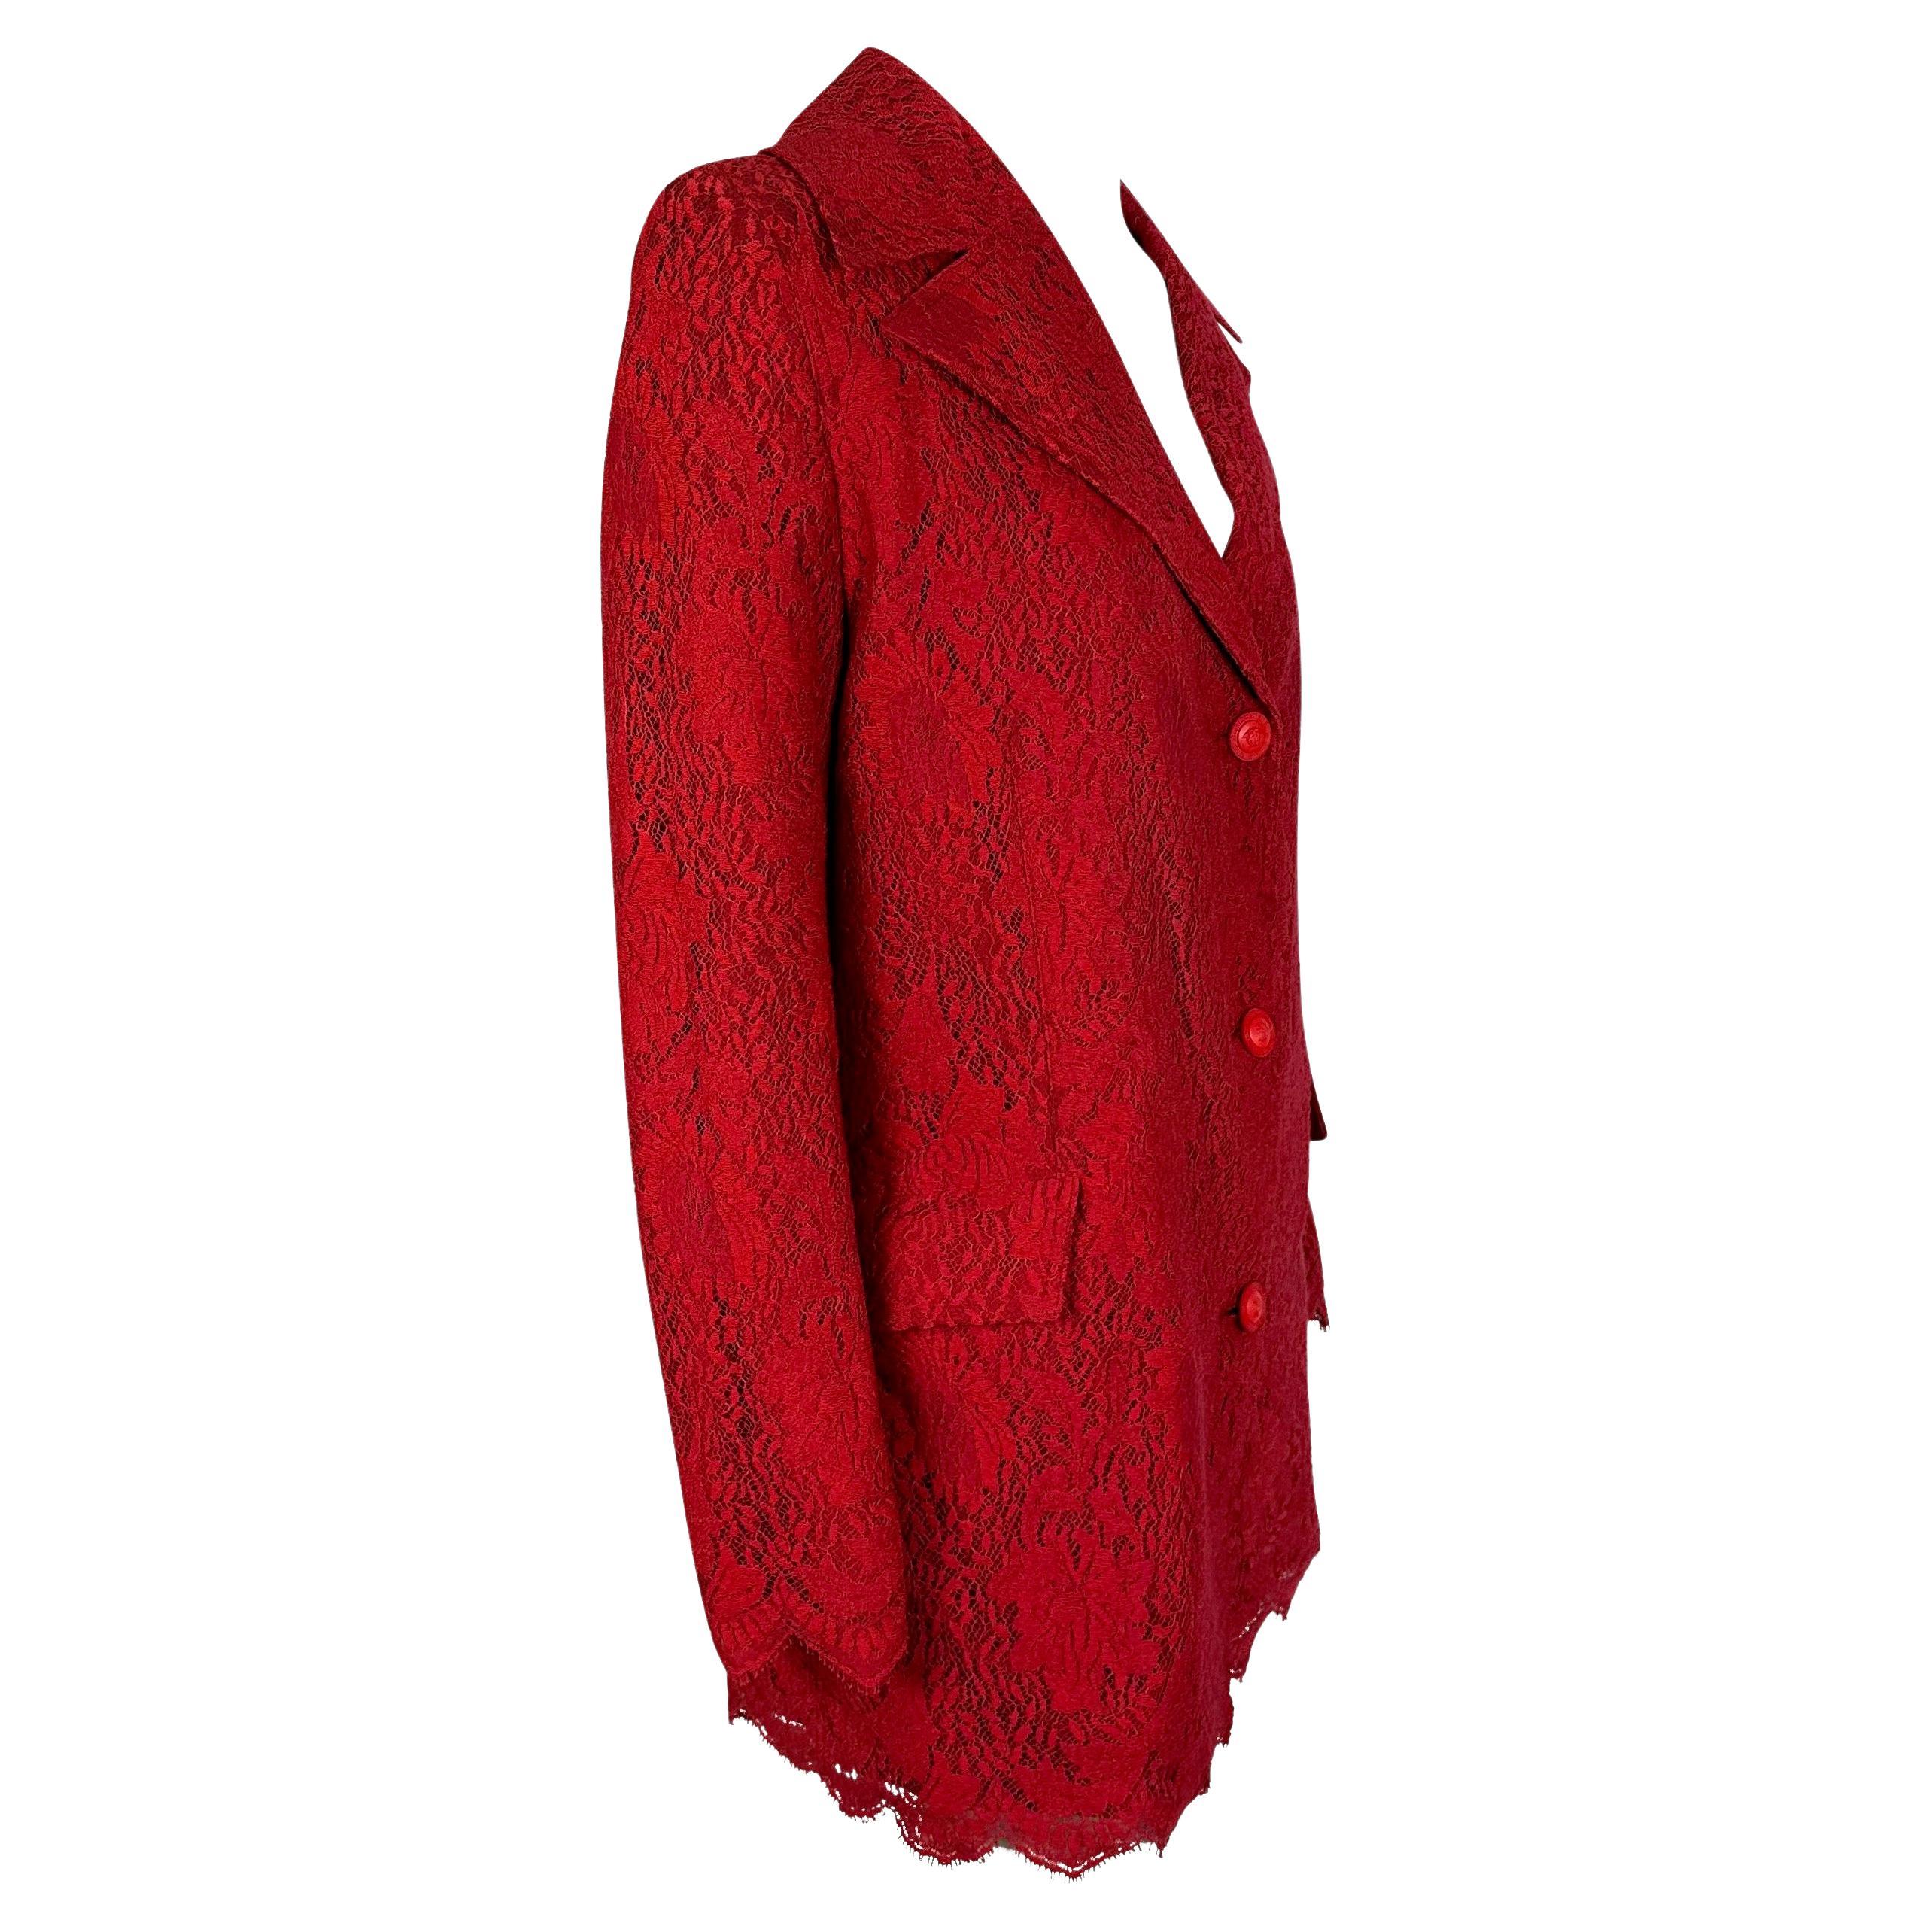 1996 Gianni Versace Red Lace Overlay Monochrome Medusa Coat In Good Condition For Sale In West Hollywood, CA